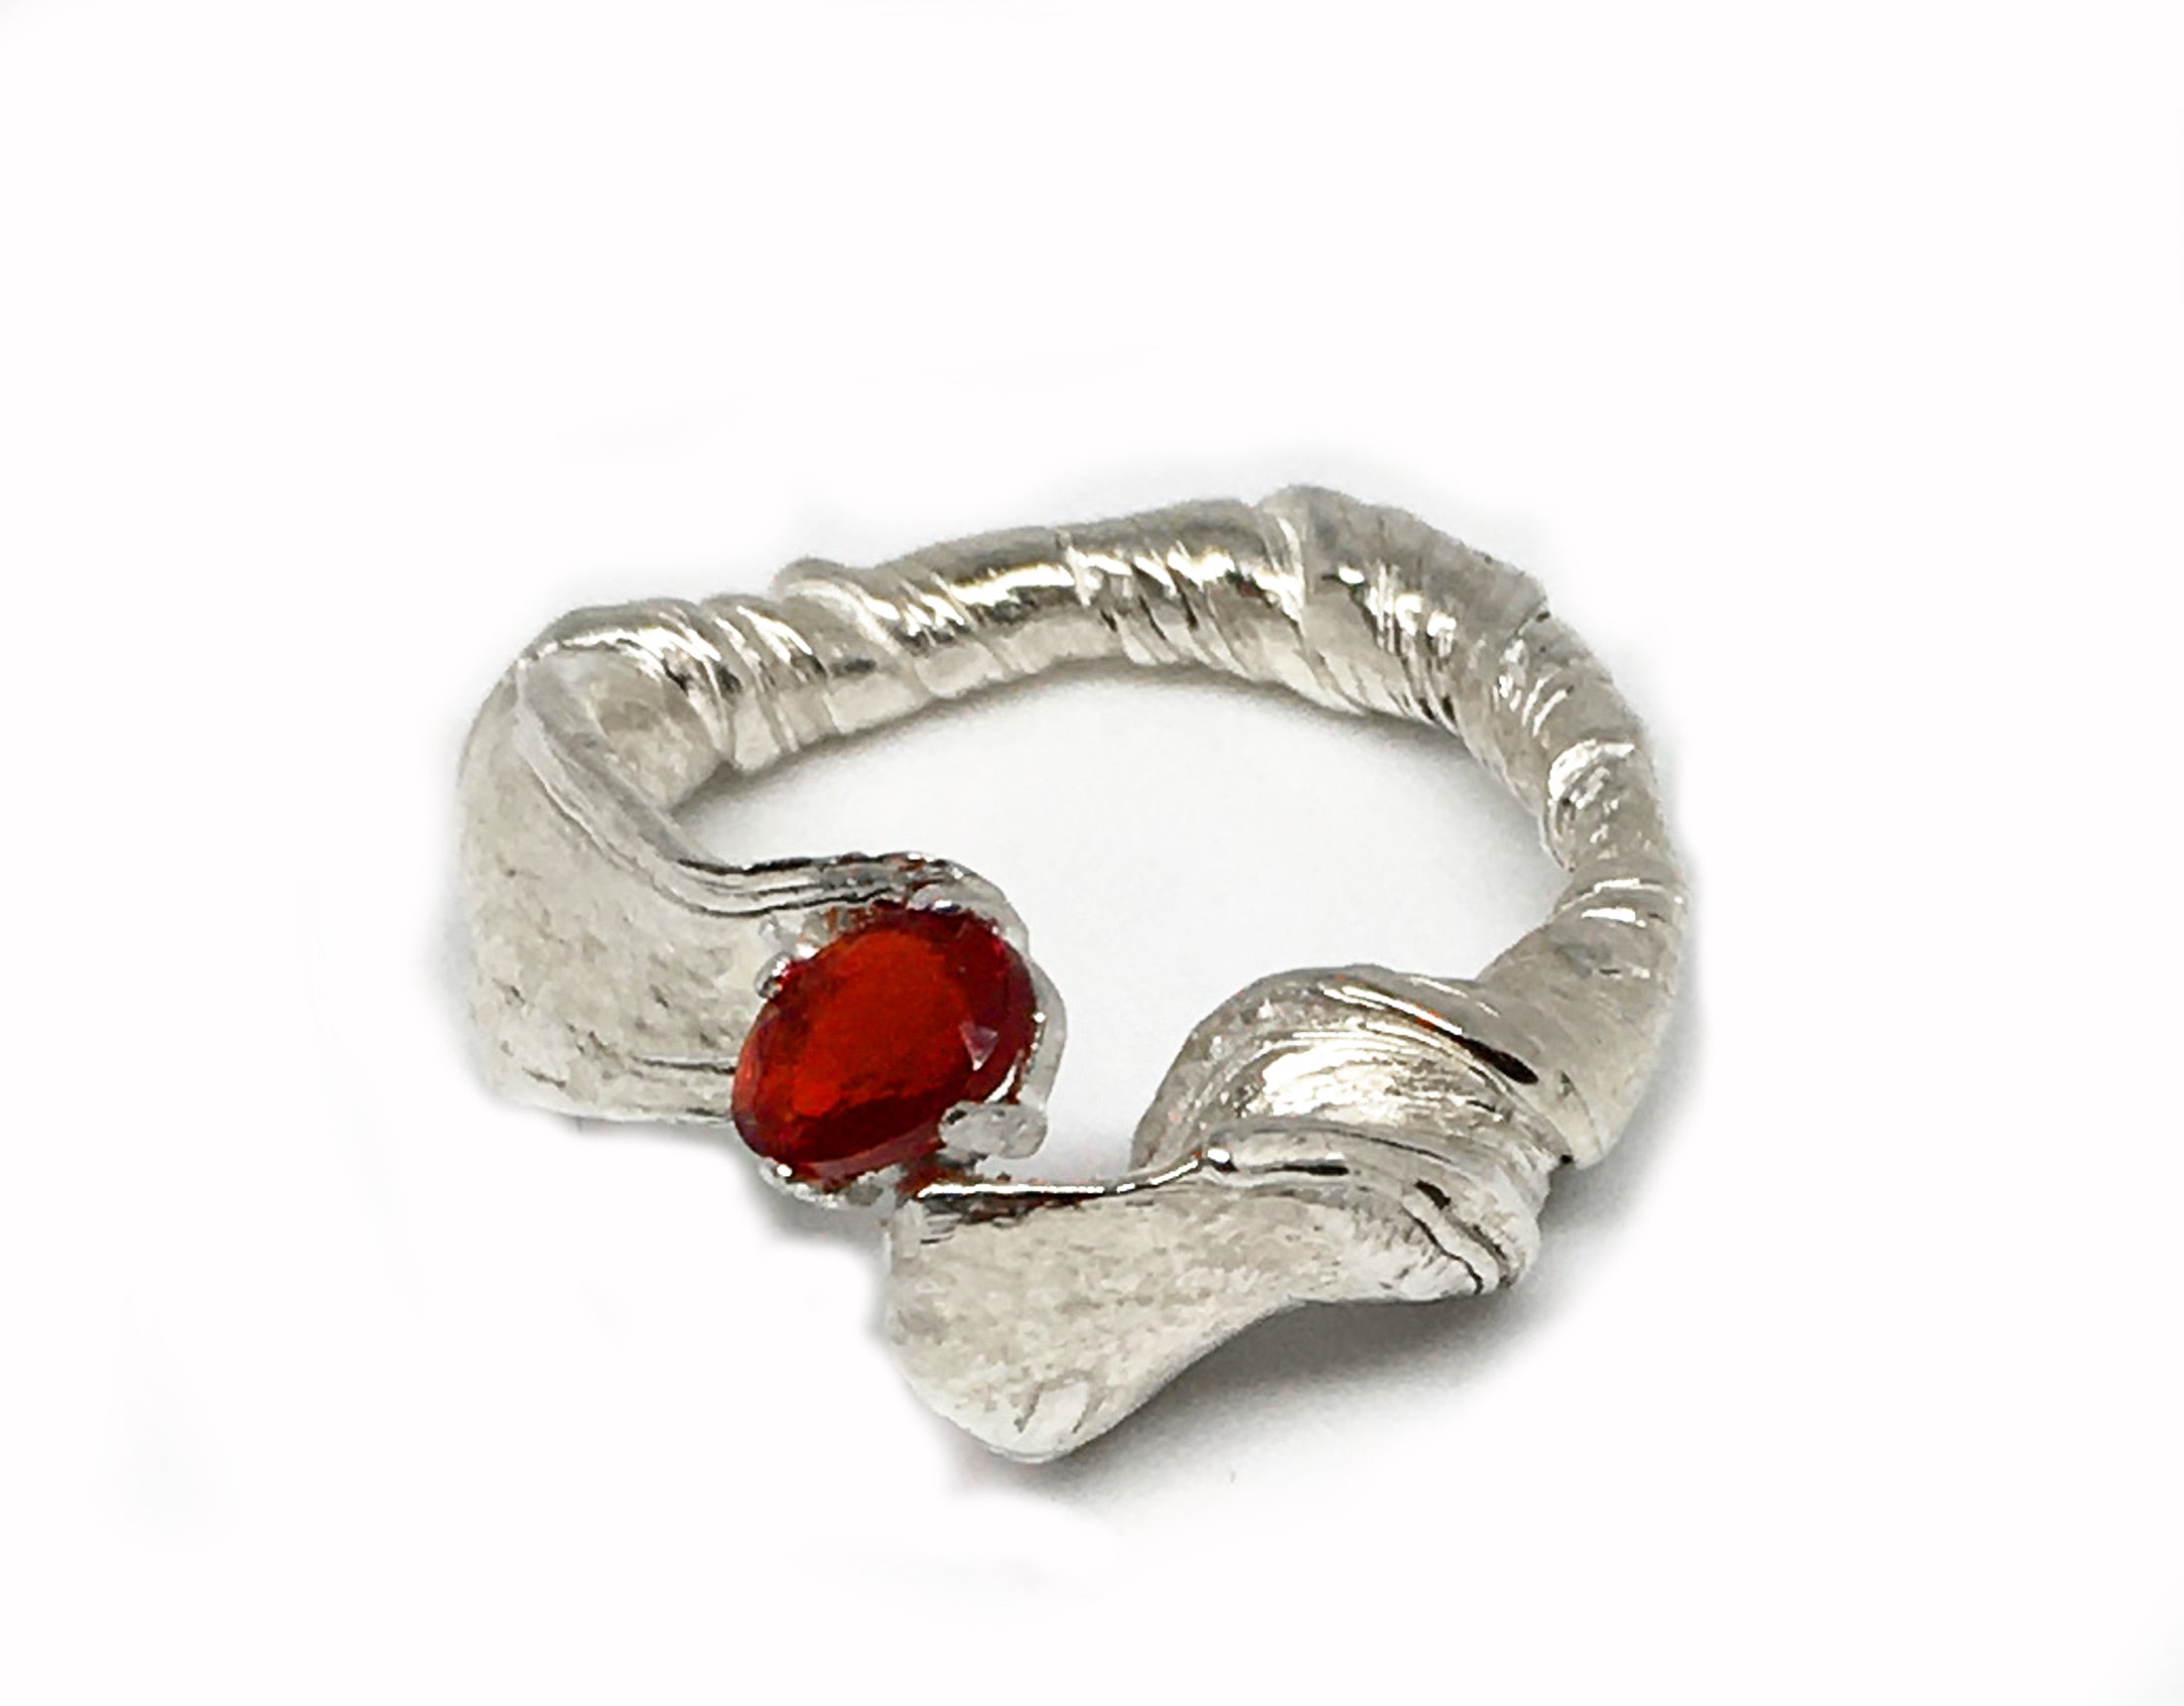 Mitsuro Hikime Sterling Silver Ring with Fire Opal Gemstone